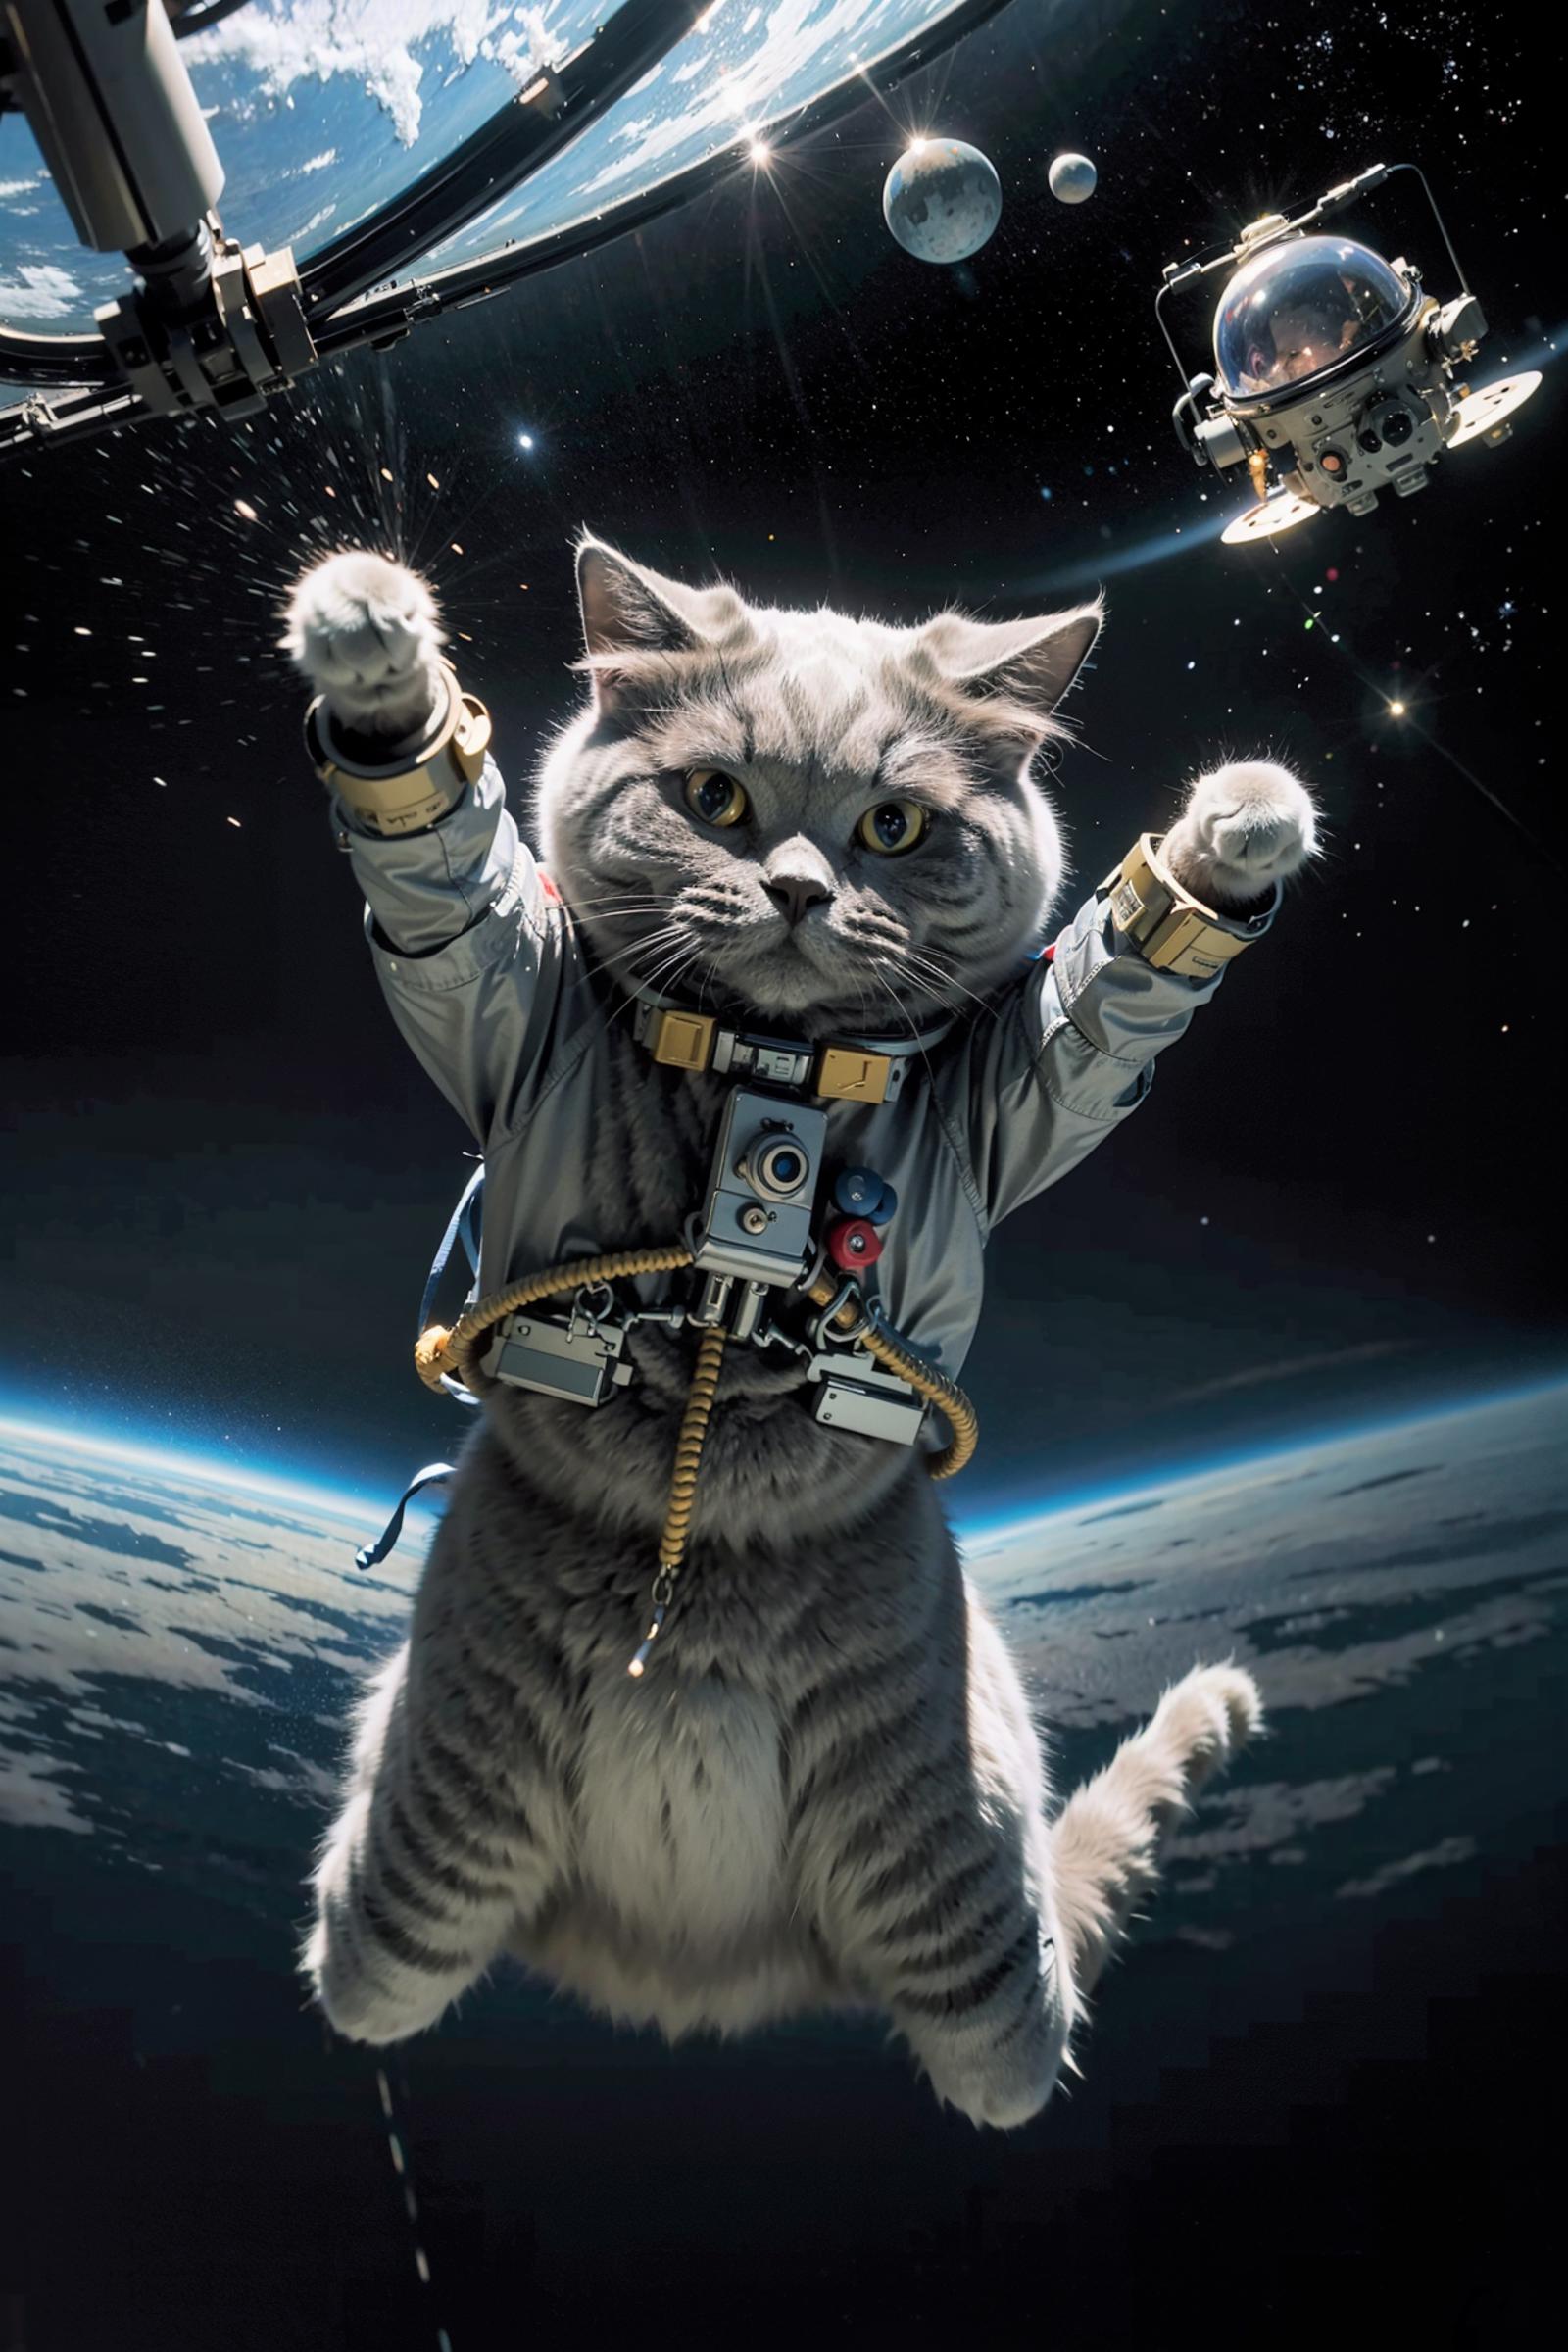 A cat dressed as an astronaut in a spacesuit.